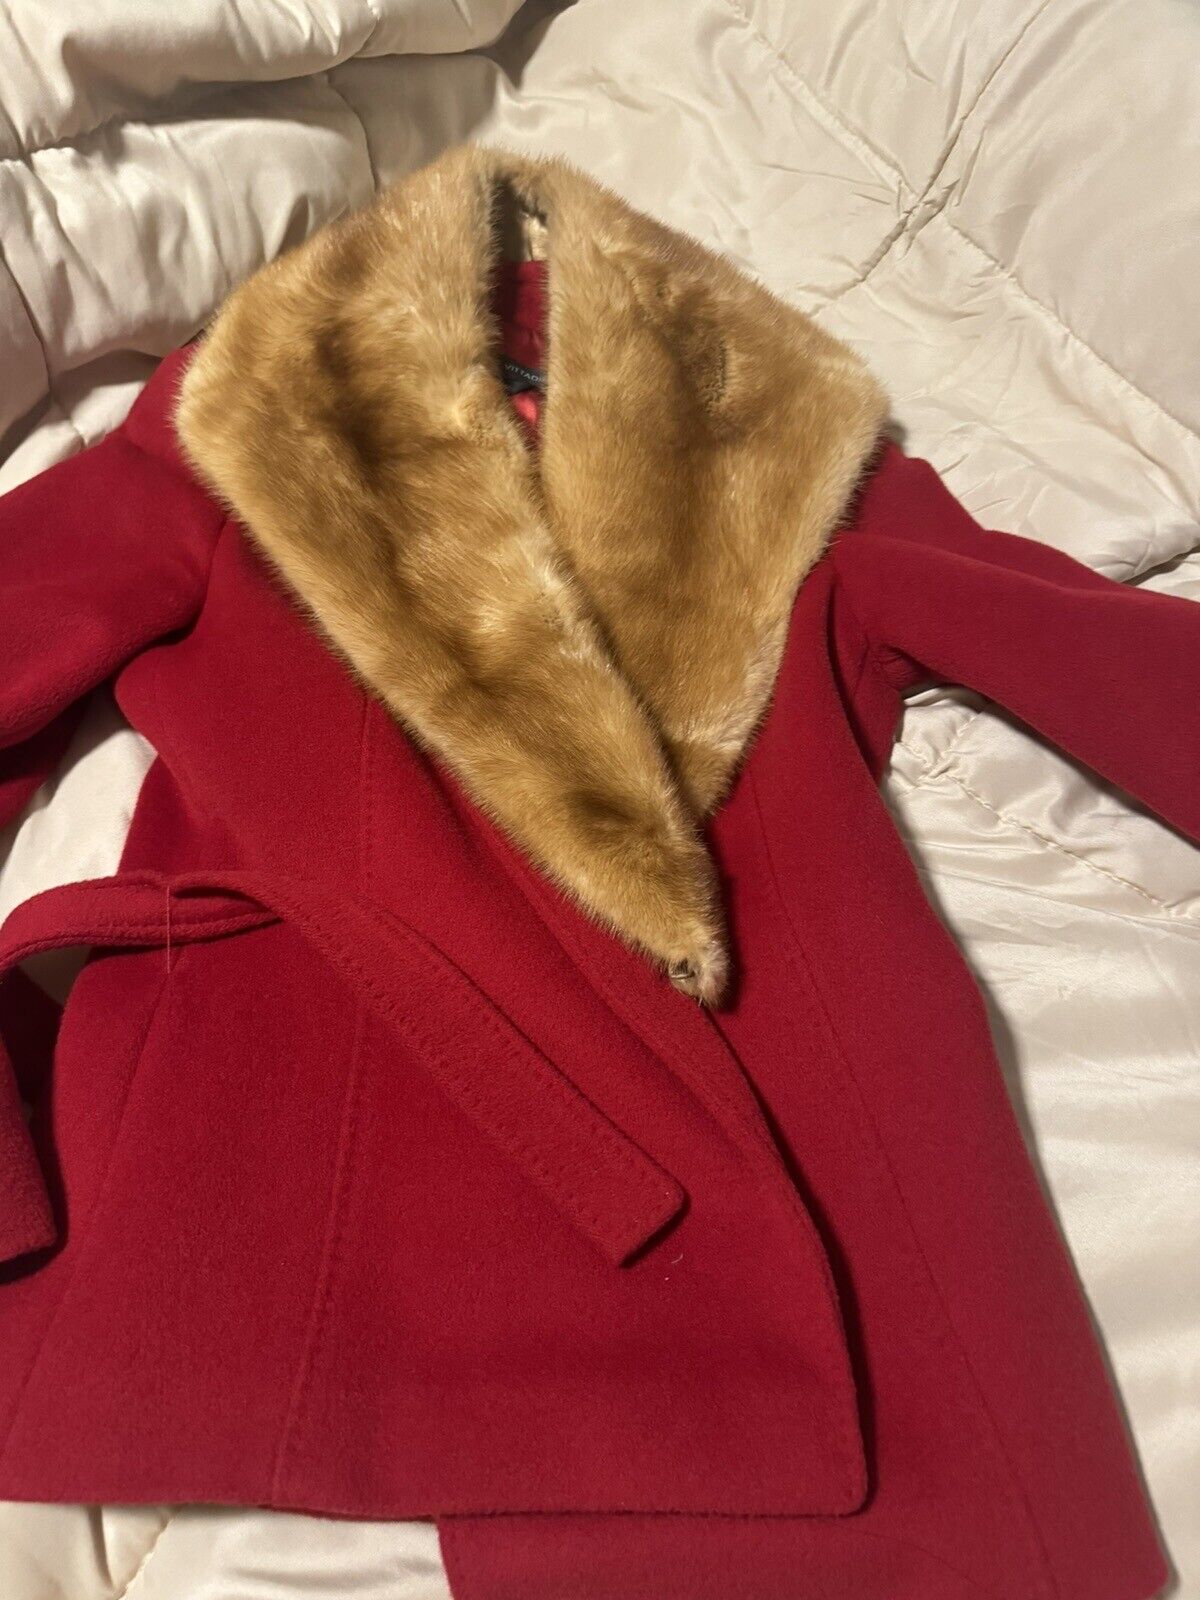 ❤️Piacenza Adrienne vittadini virgin Wool Mink Made In Italy Coat Red 2 Small Xs